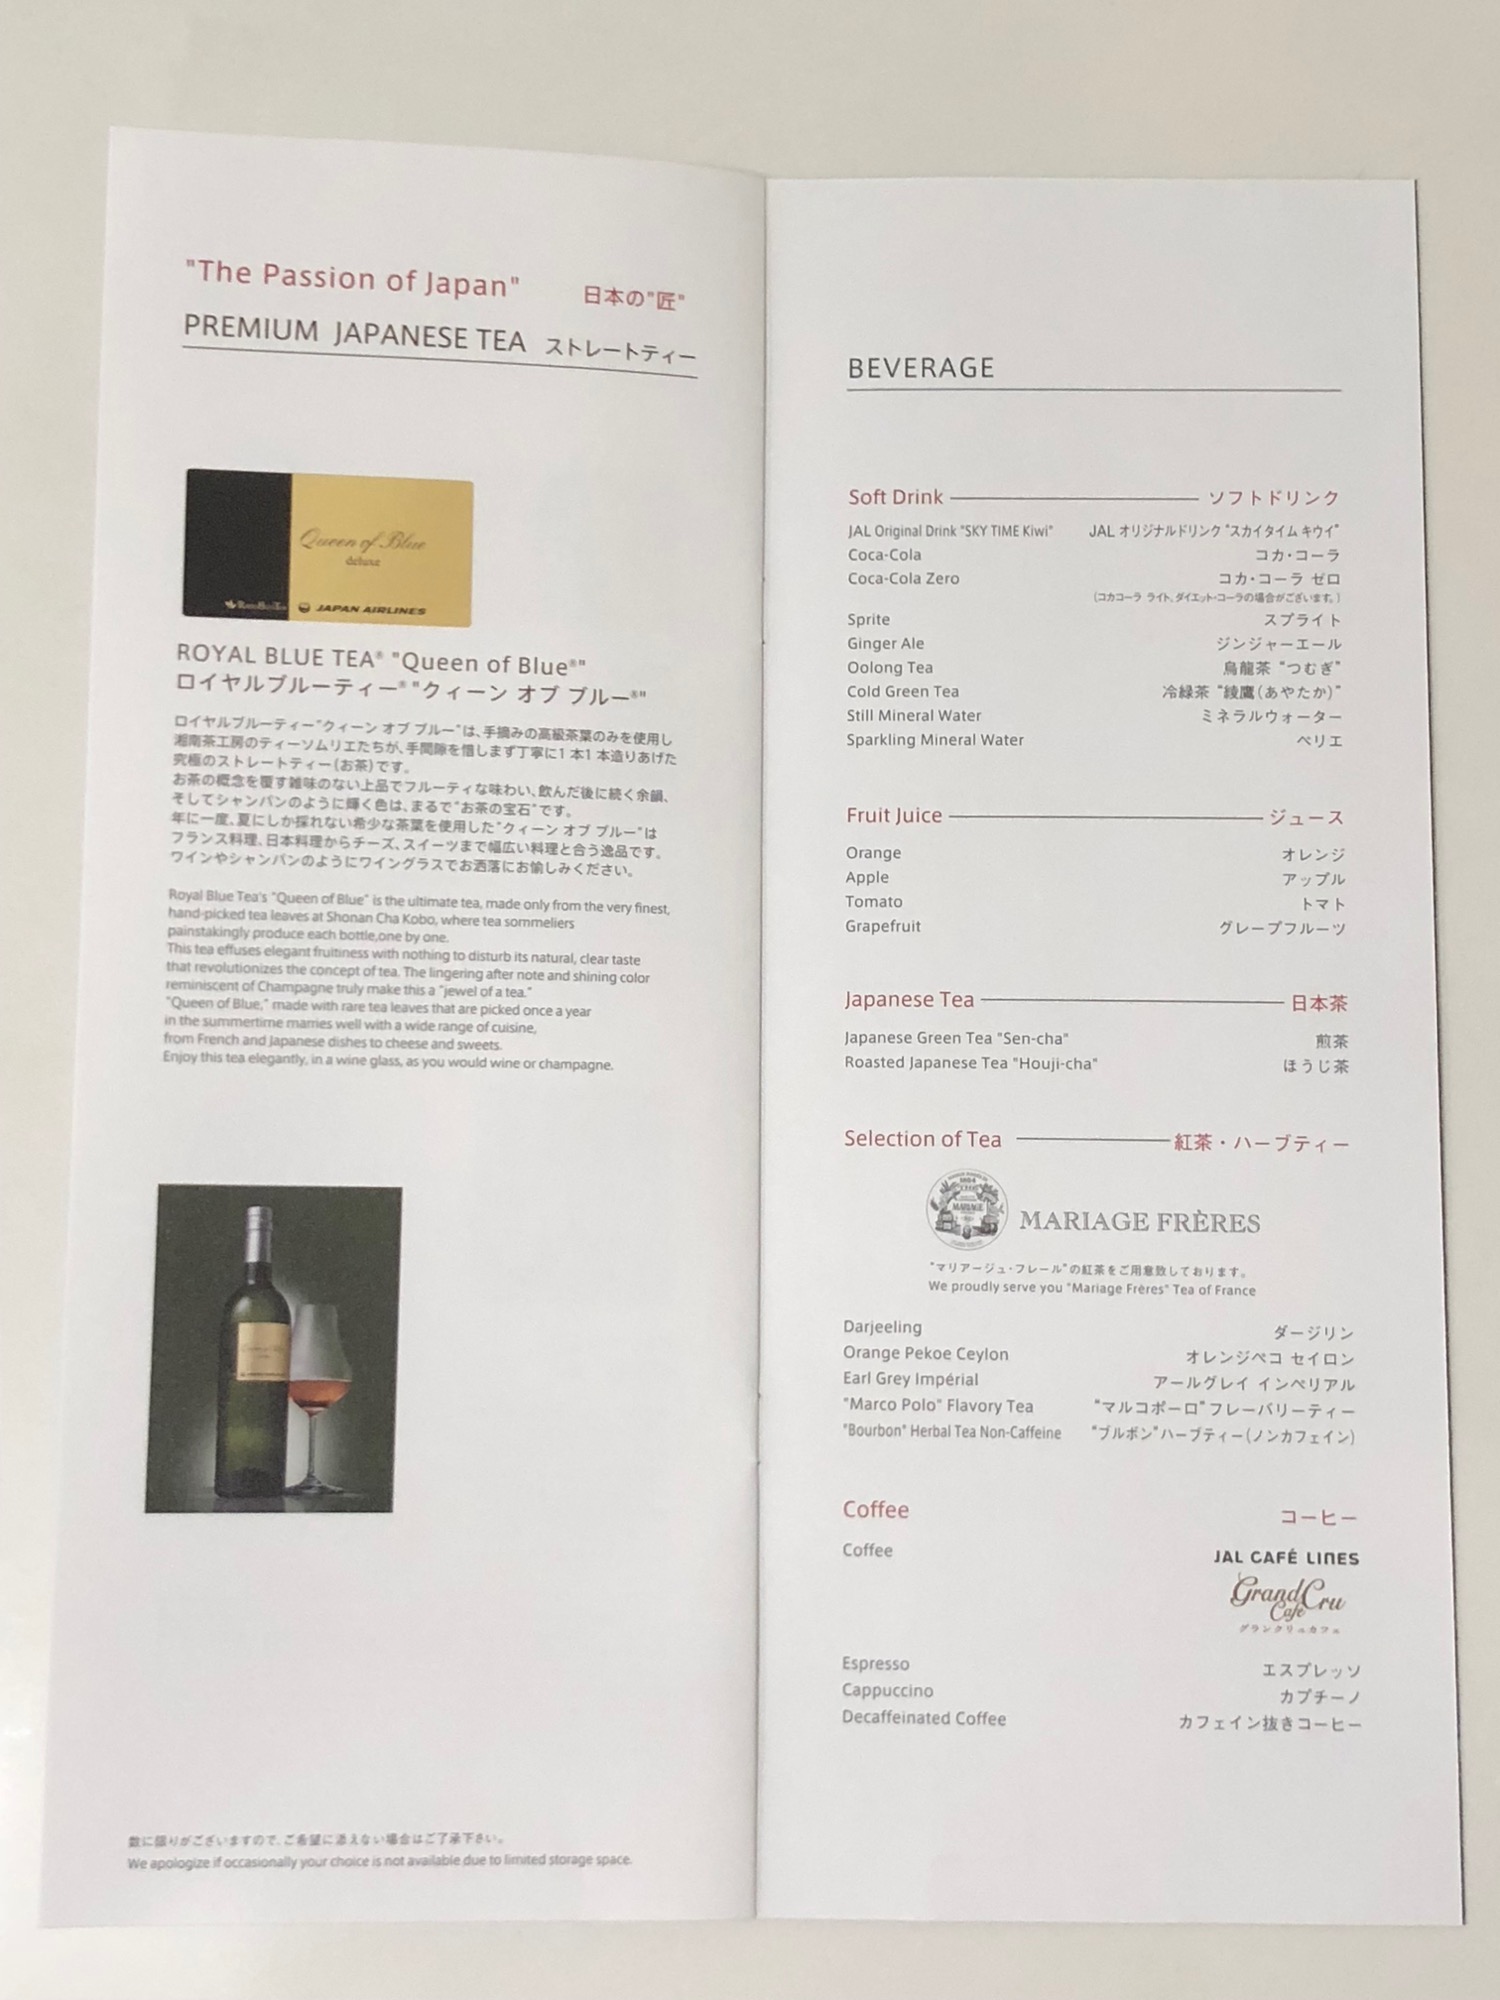 a menu with a bottle of wine and a glass of wine